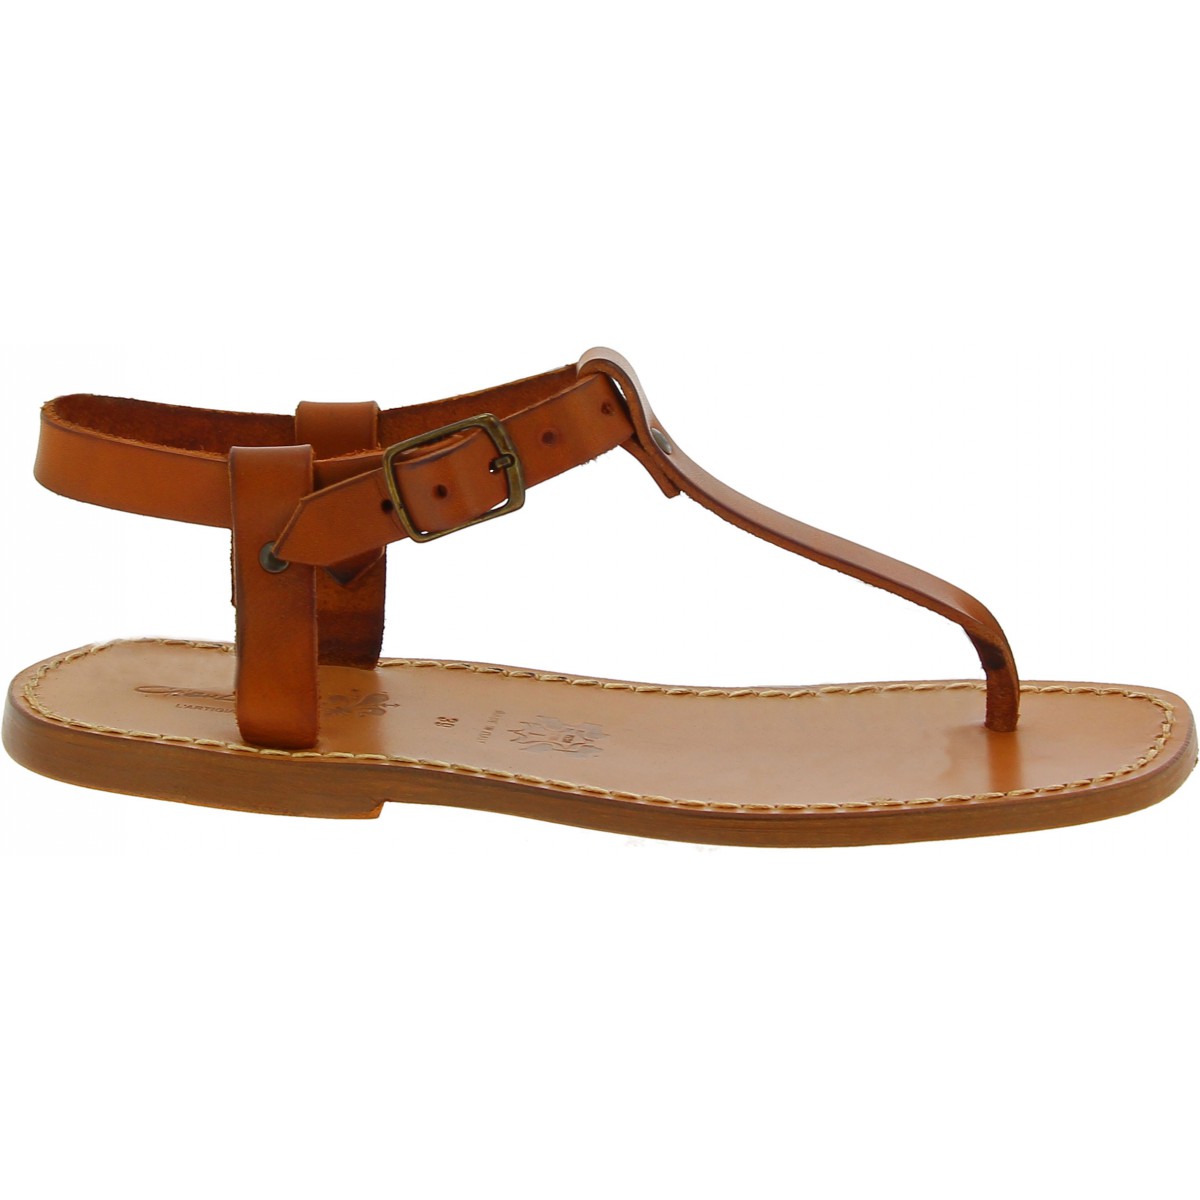 Handmade men's tan leather thong sandals | The leather craftsmen